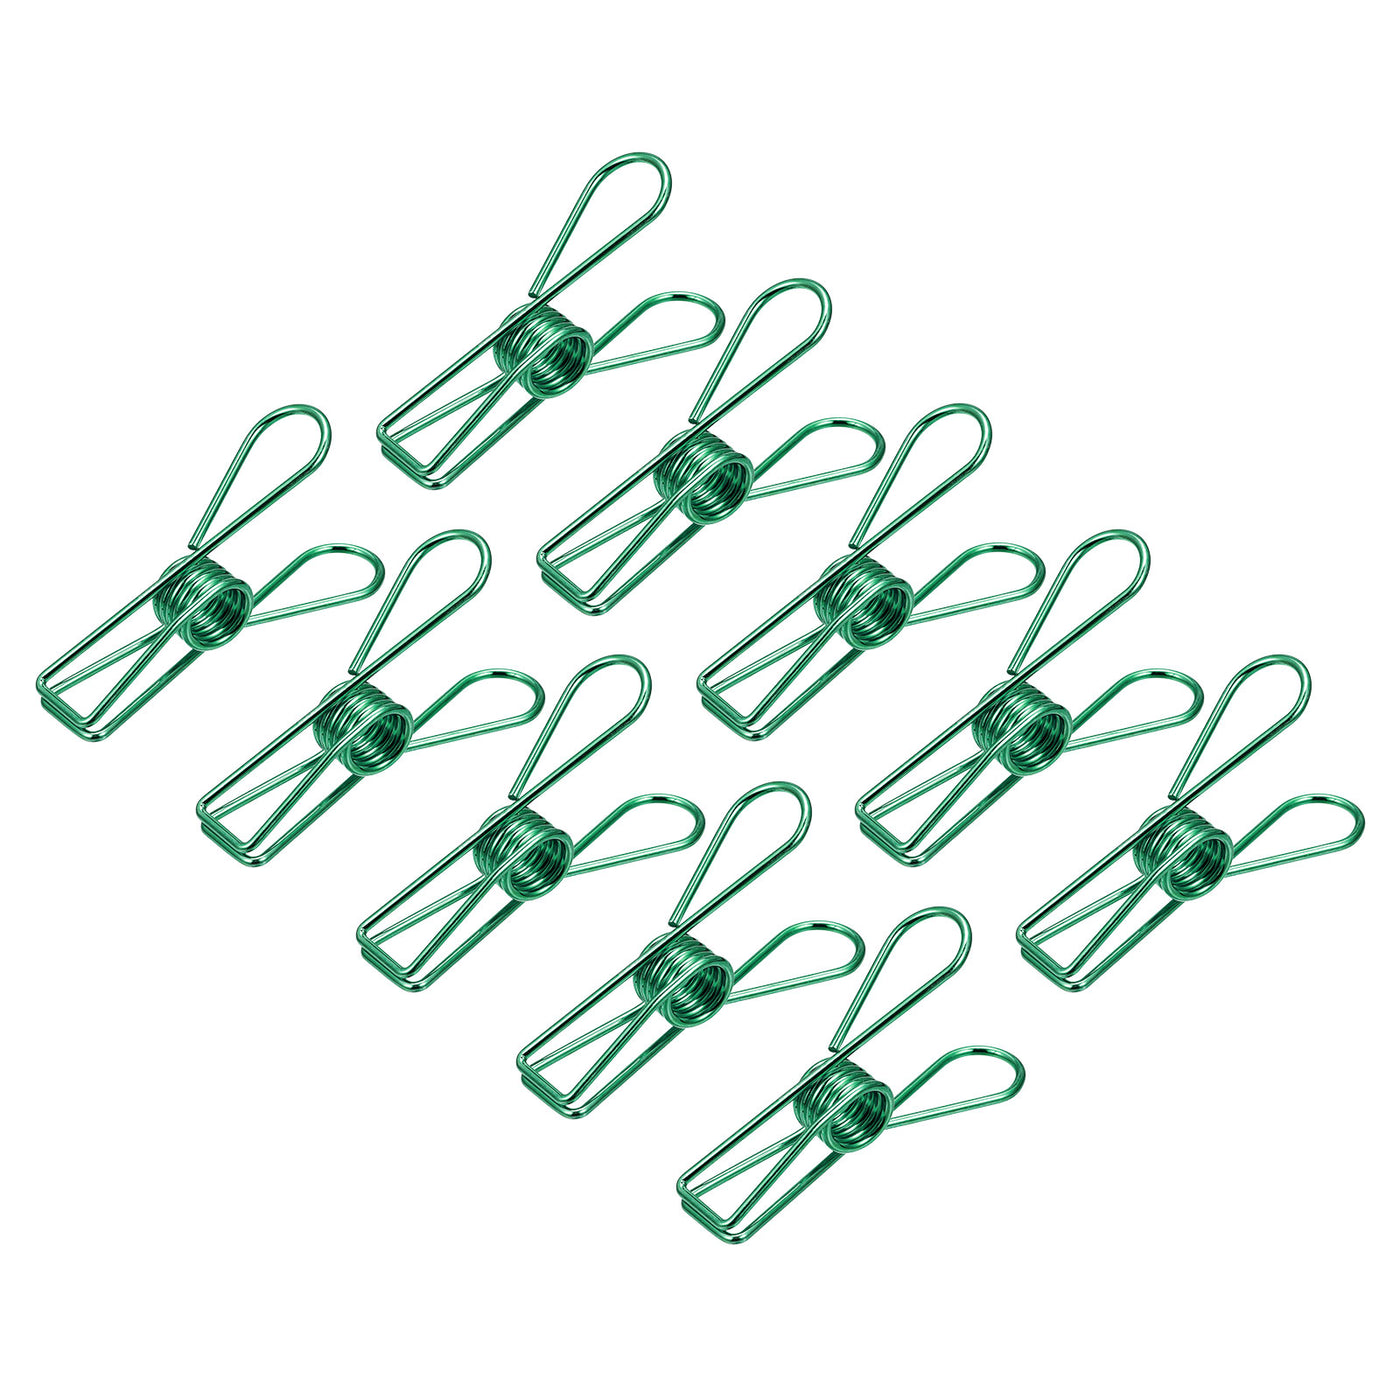 uxcell Uxcell Tablecloth Clips, 70mm Carbon Steel Clamps for Fix Table Cloth, Green 20 Pcs